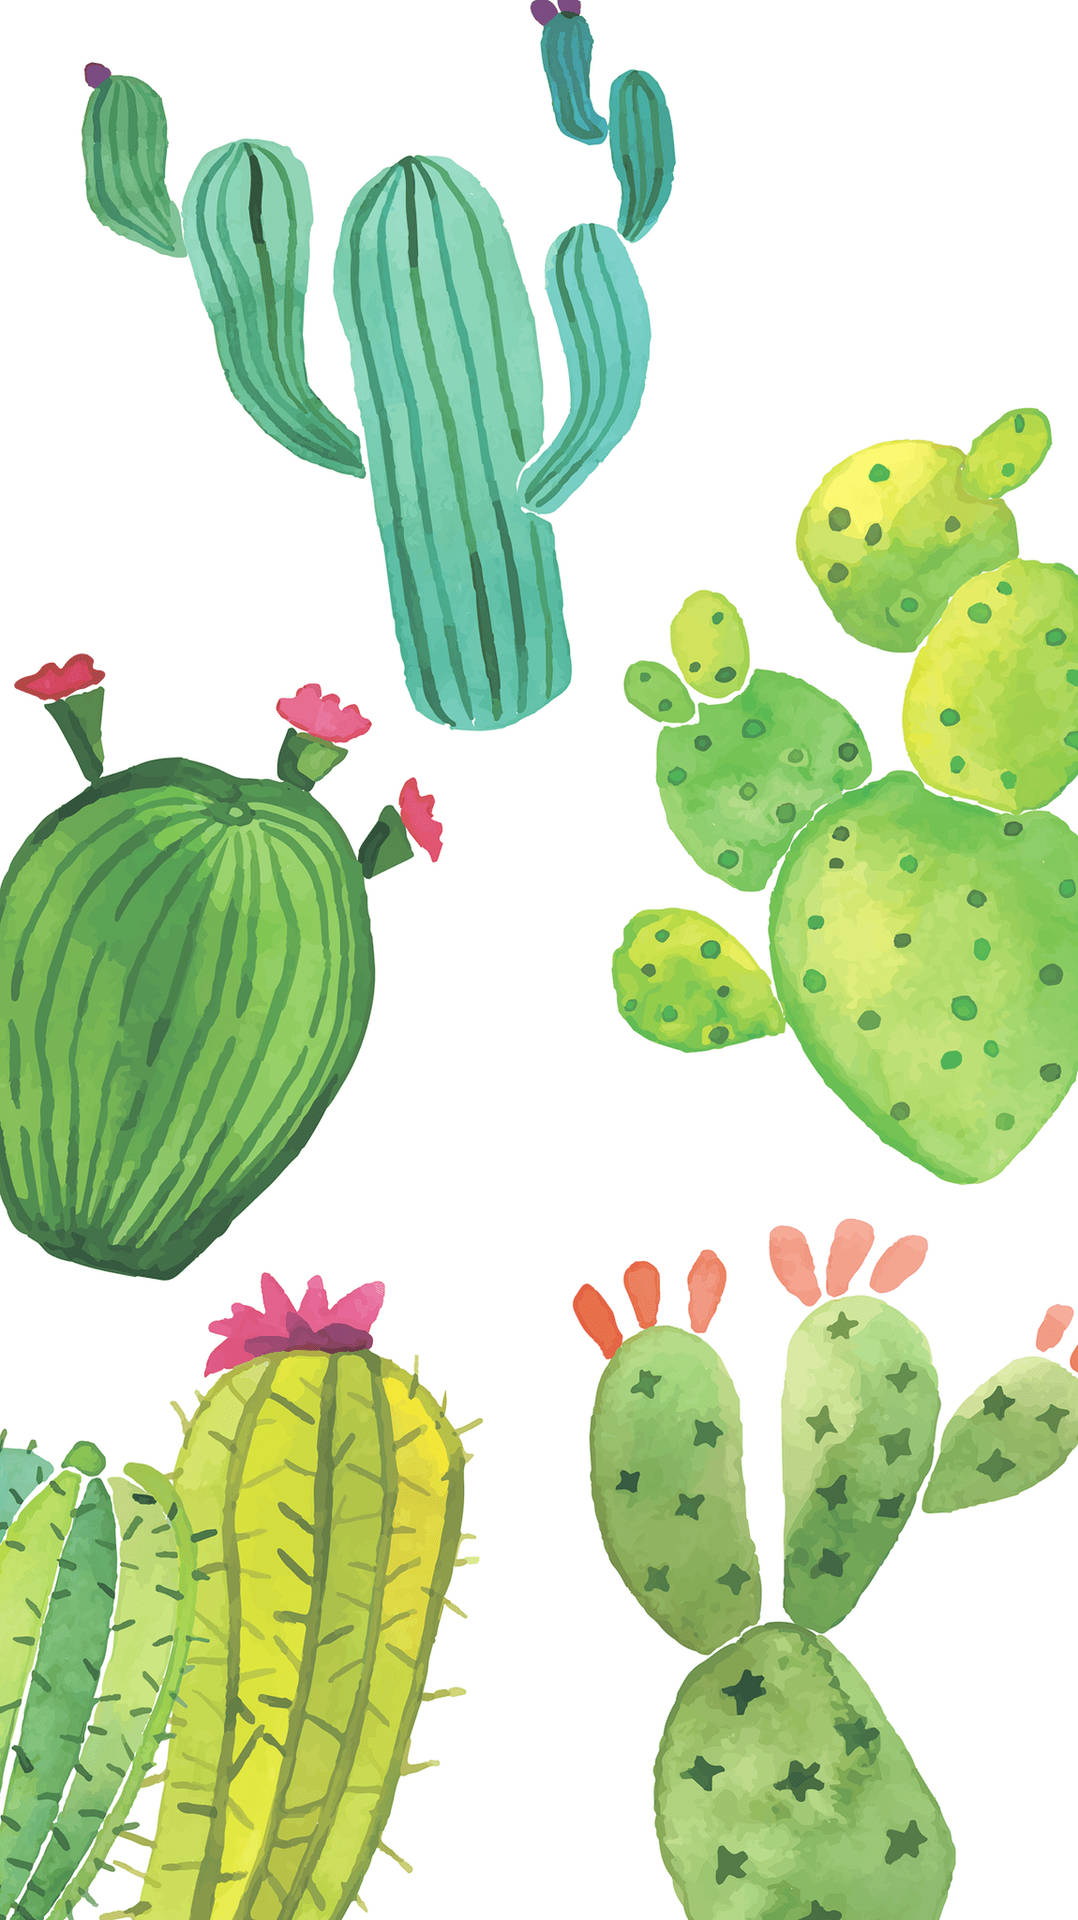 A Fun and Colorful Cactus Wallpaper